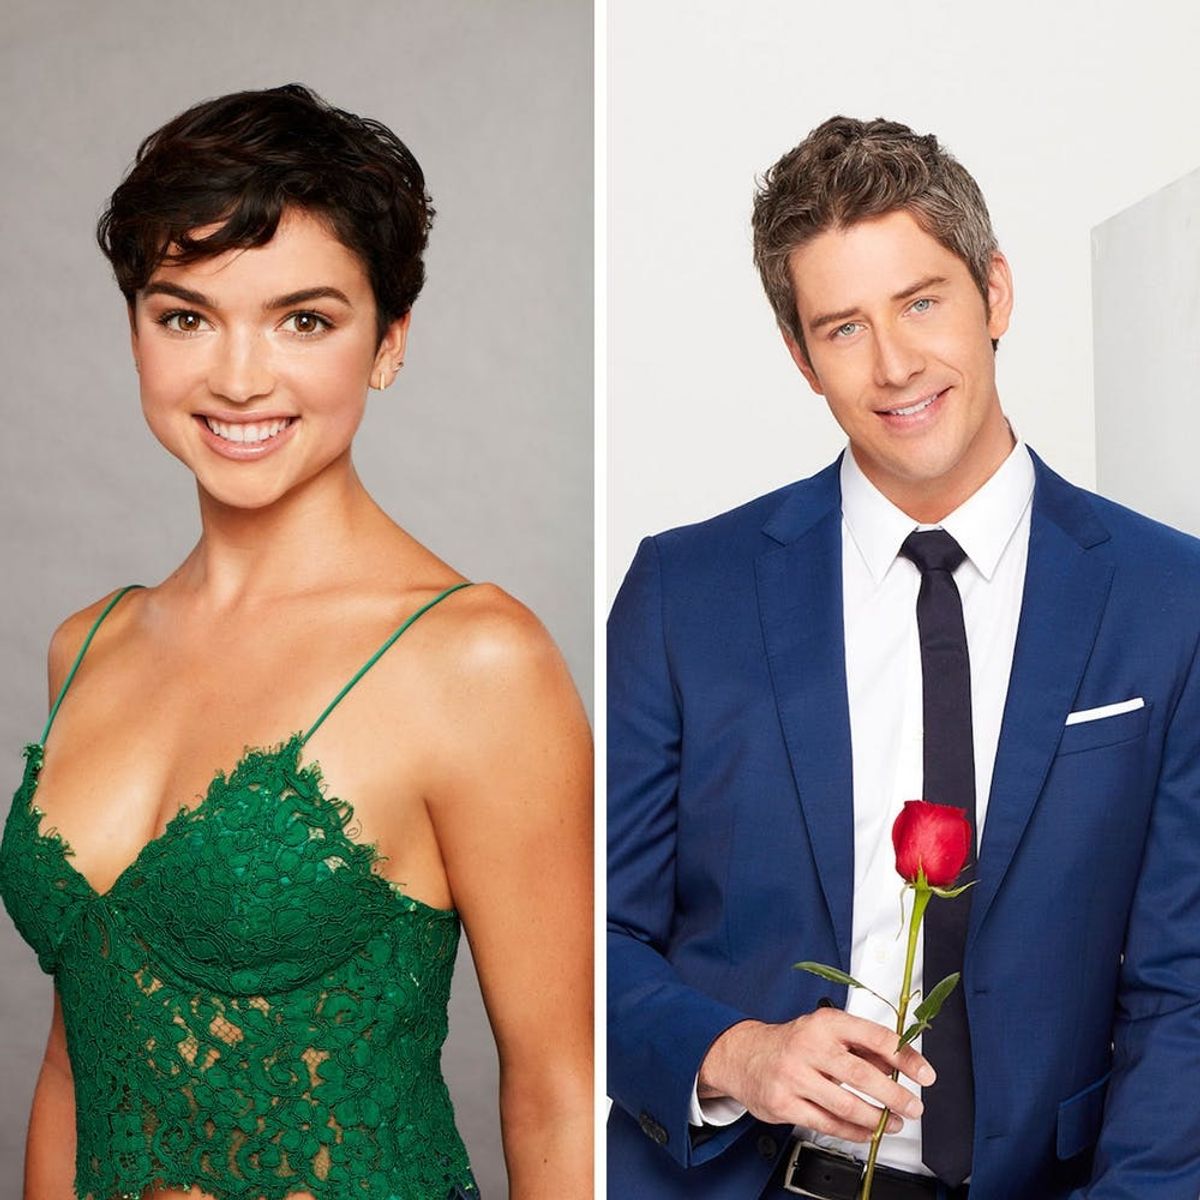 ‘Bachelor’ Star Bekah Martinez Doesn’t Think Arie Luyendyk Jr. Is Really Ready for Marriage